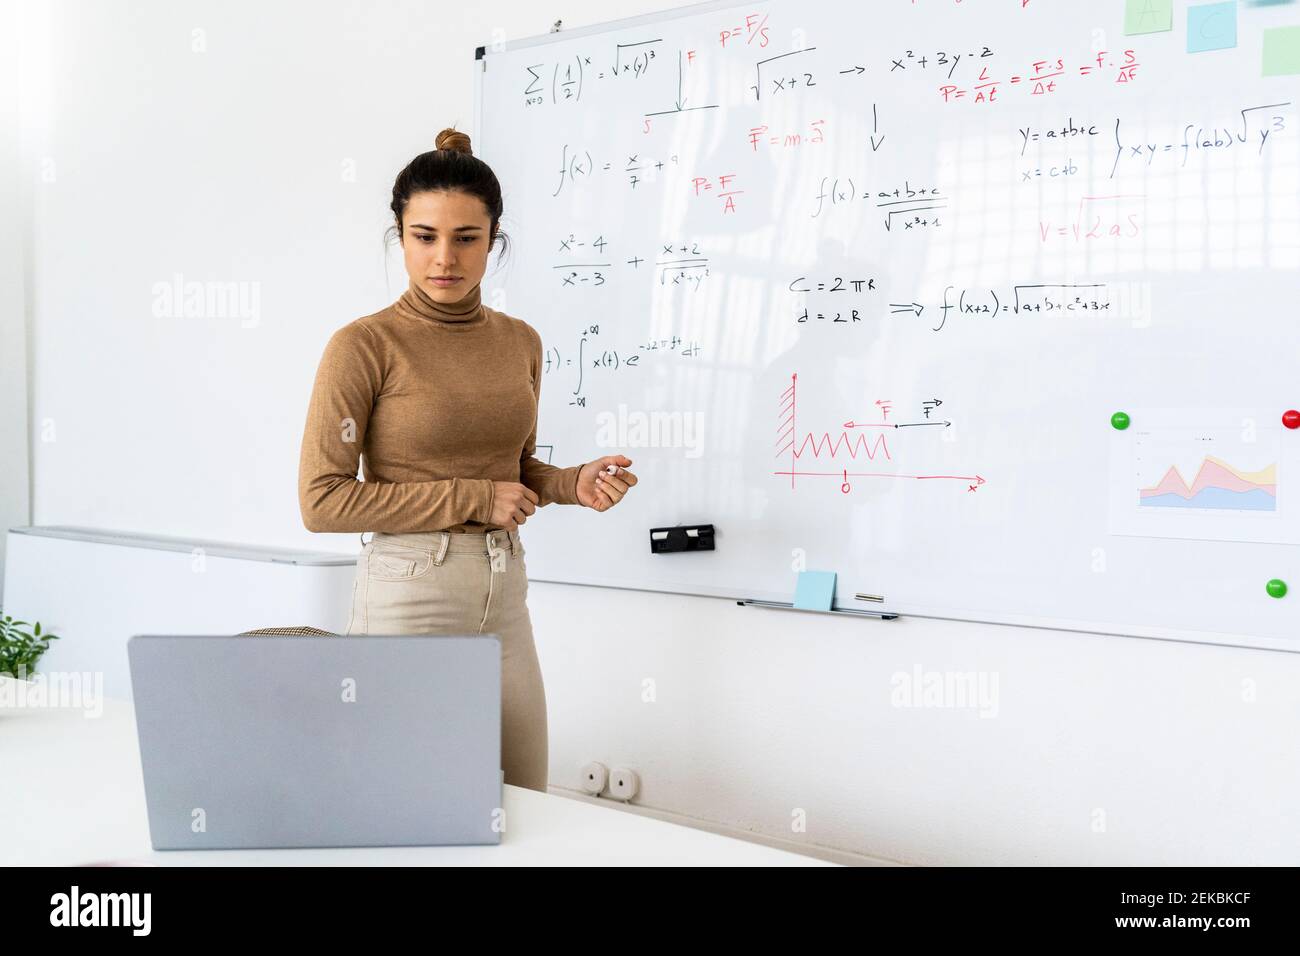 Woman looking at laptop while solving mathematical formula in living room Stock Photo